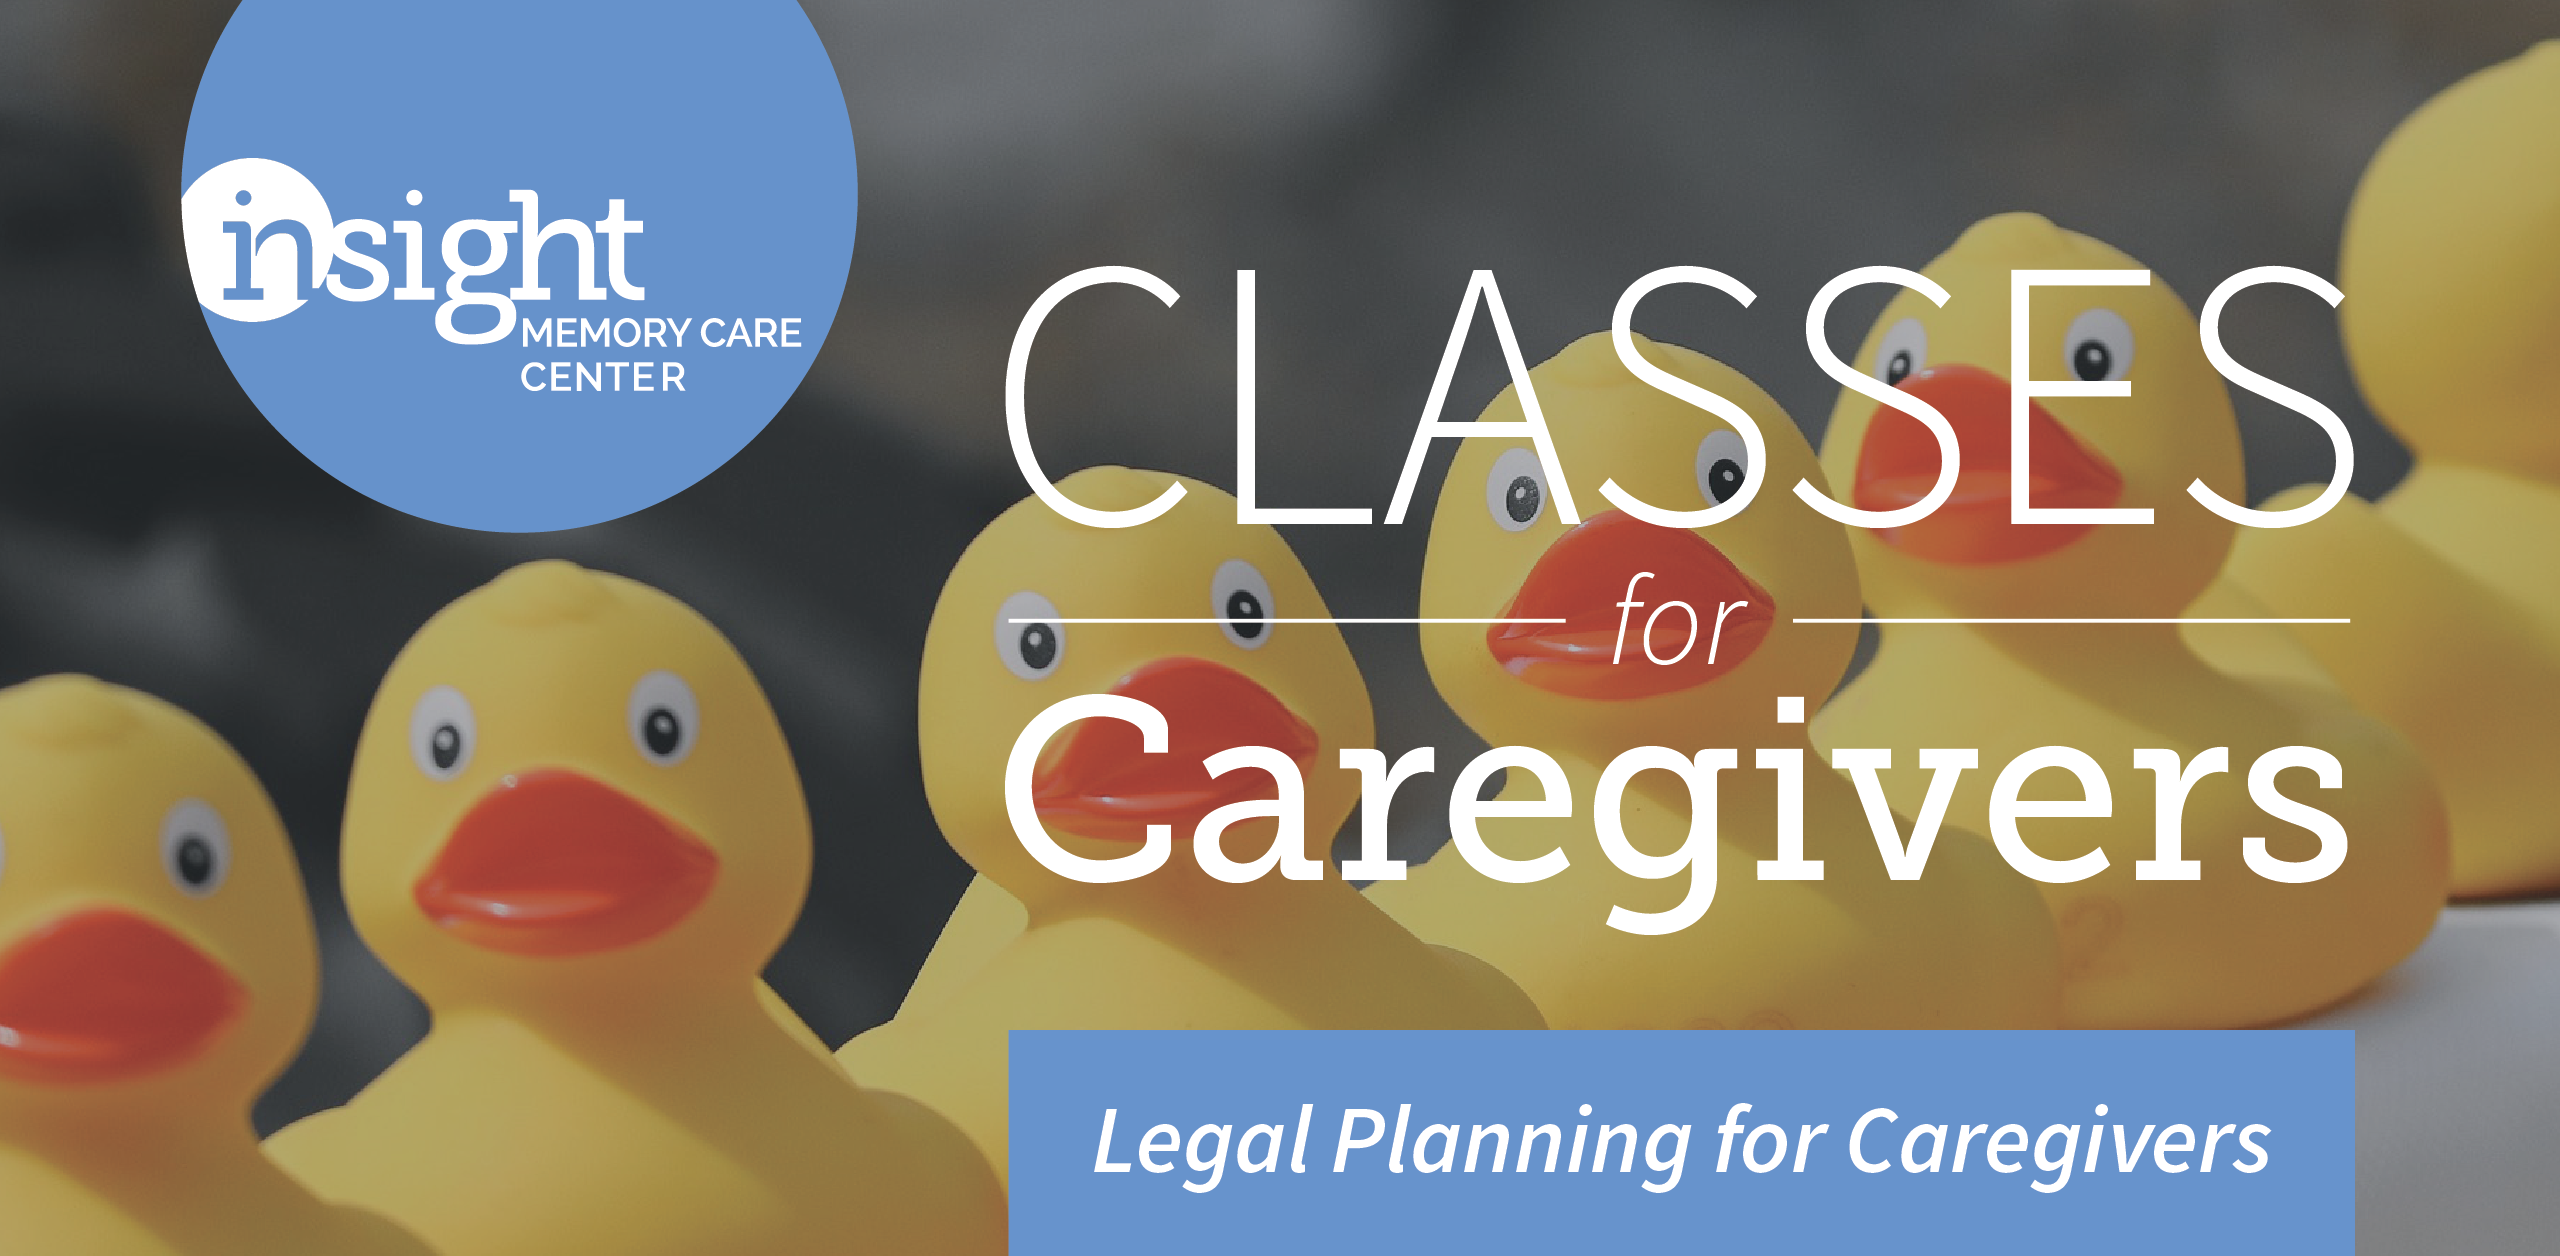 Legal Planning for Caregivers: Get Your Ducks in a Row